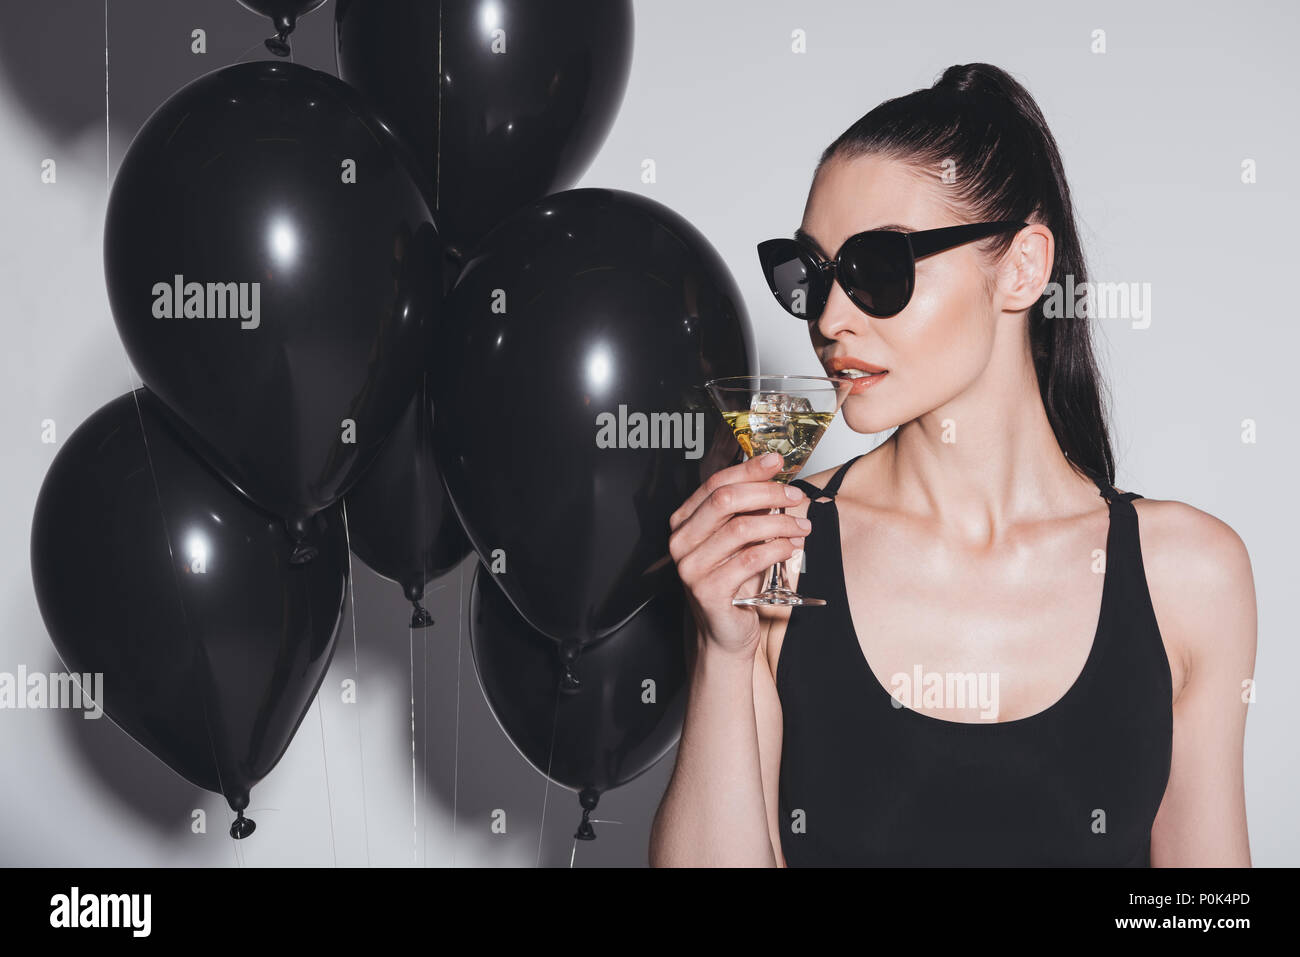 Gorgeous young woman in sunglasses and leotard drinking martini while standing in studio with black balloons Stock Photo